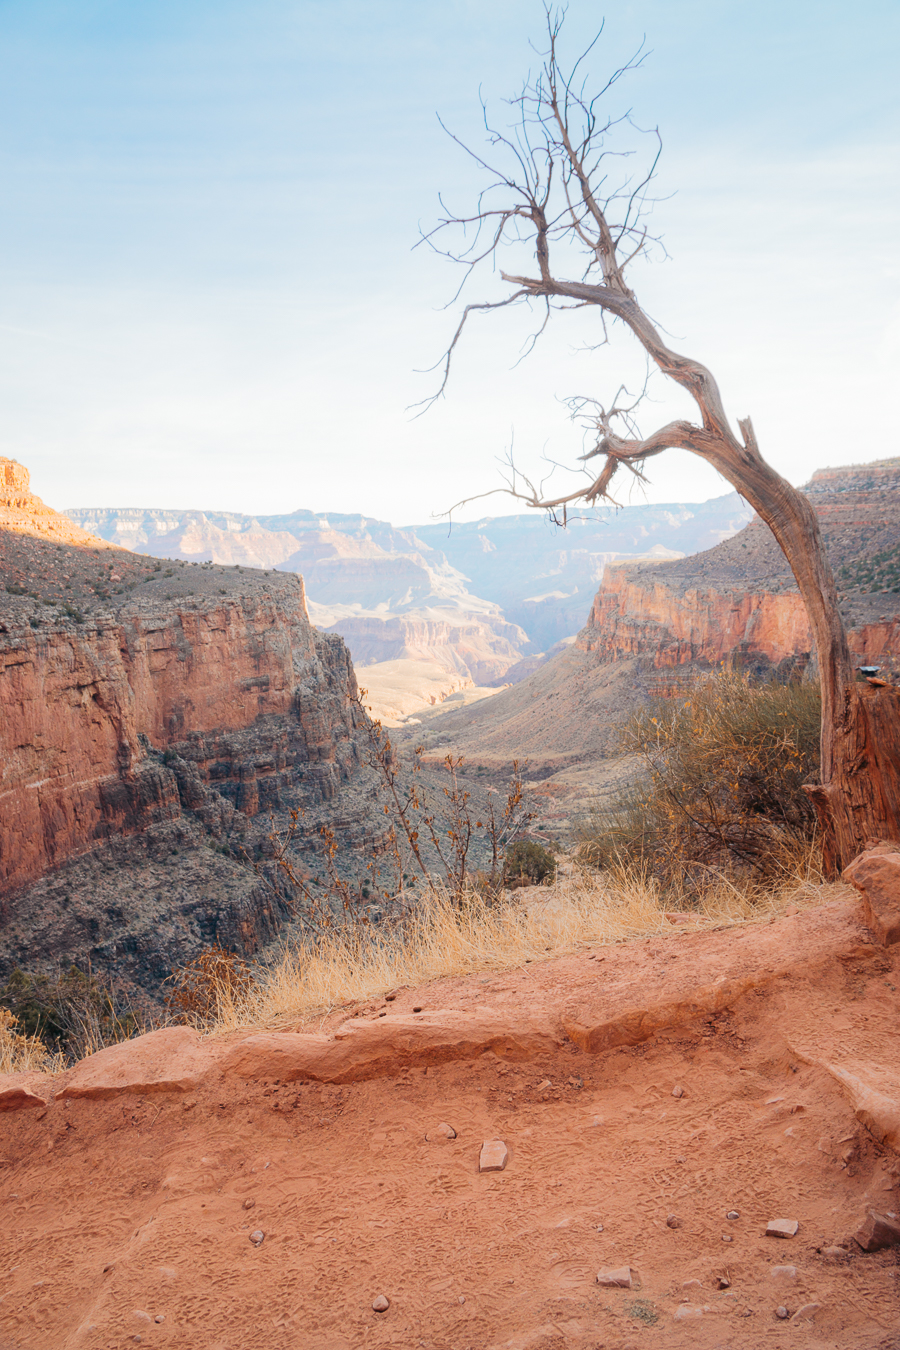 Best Day Hikes in the Grand Canyon